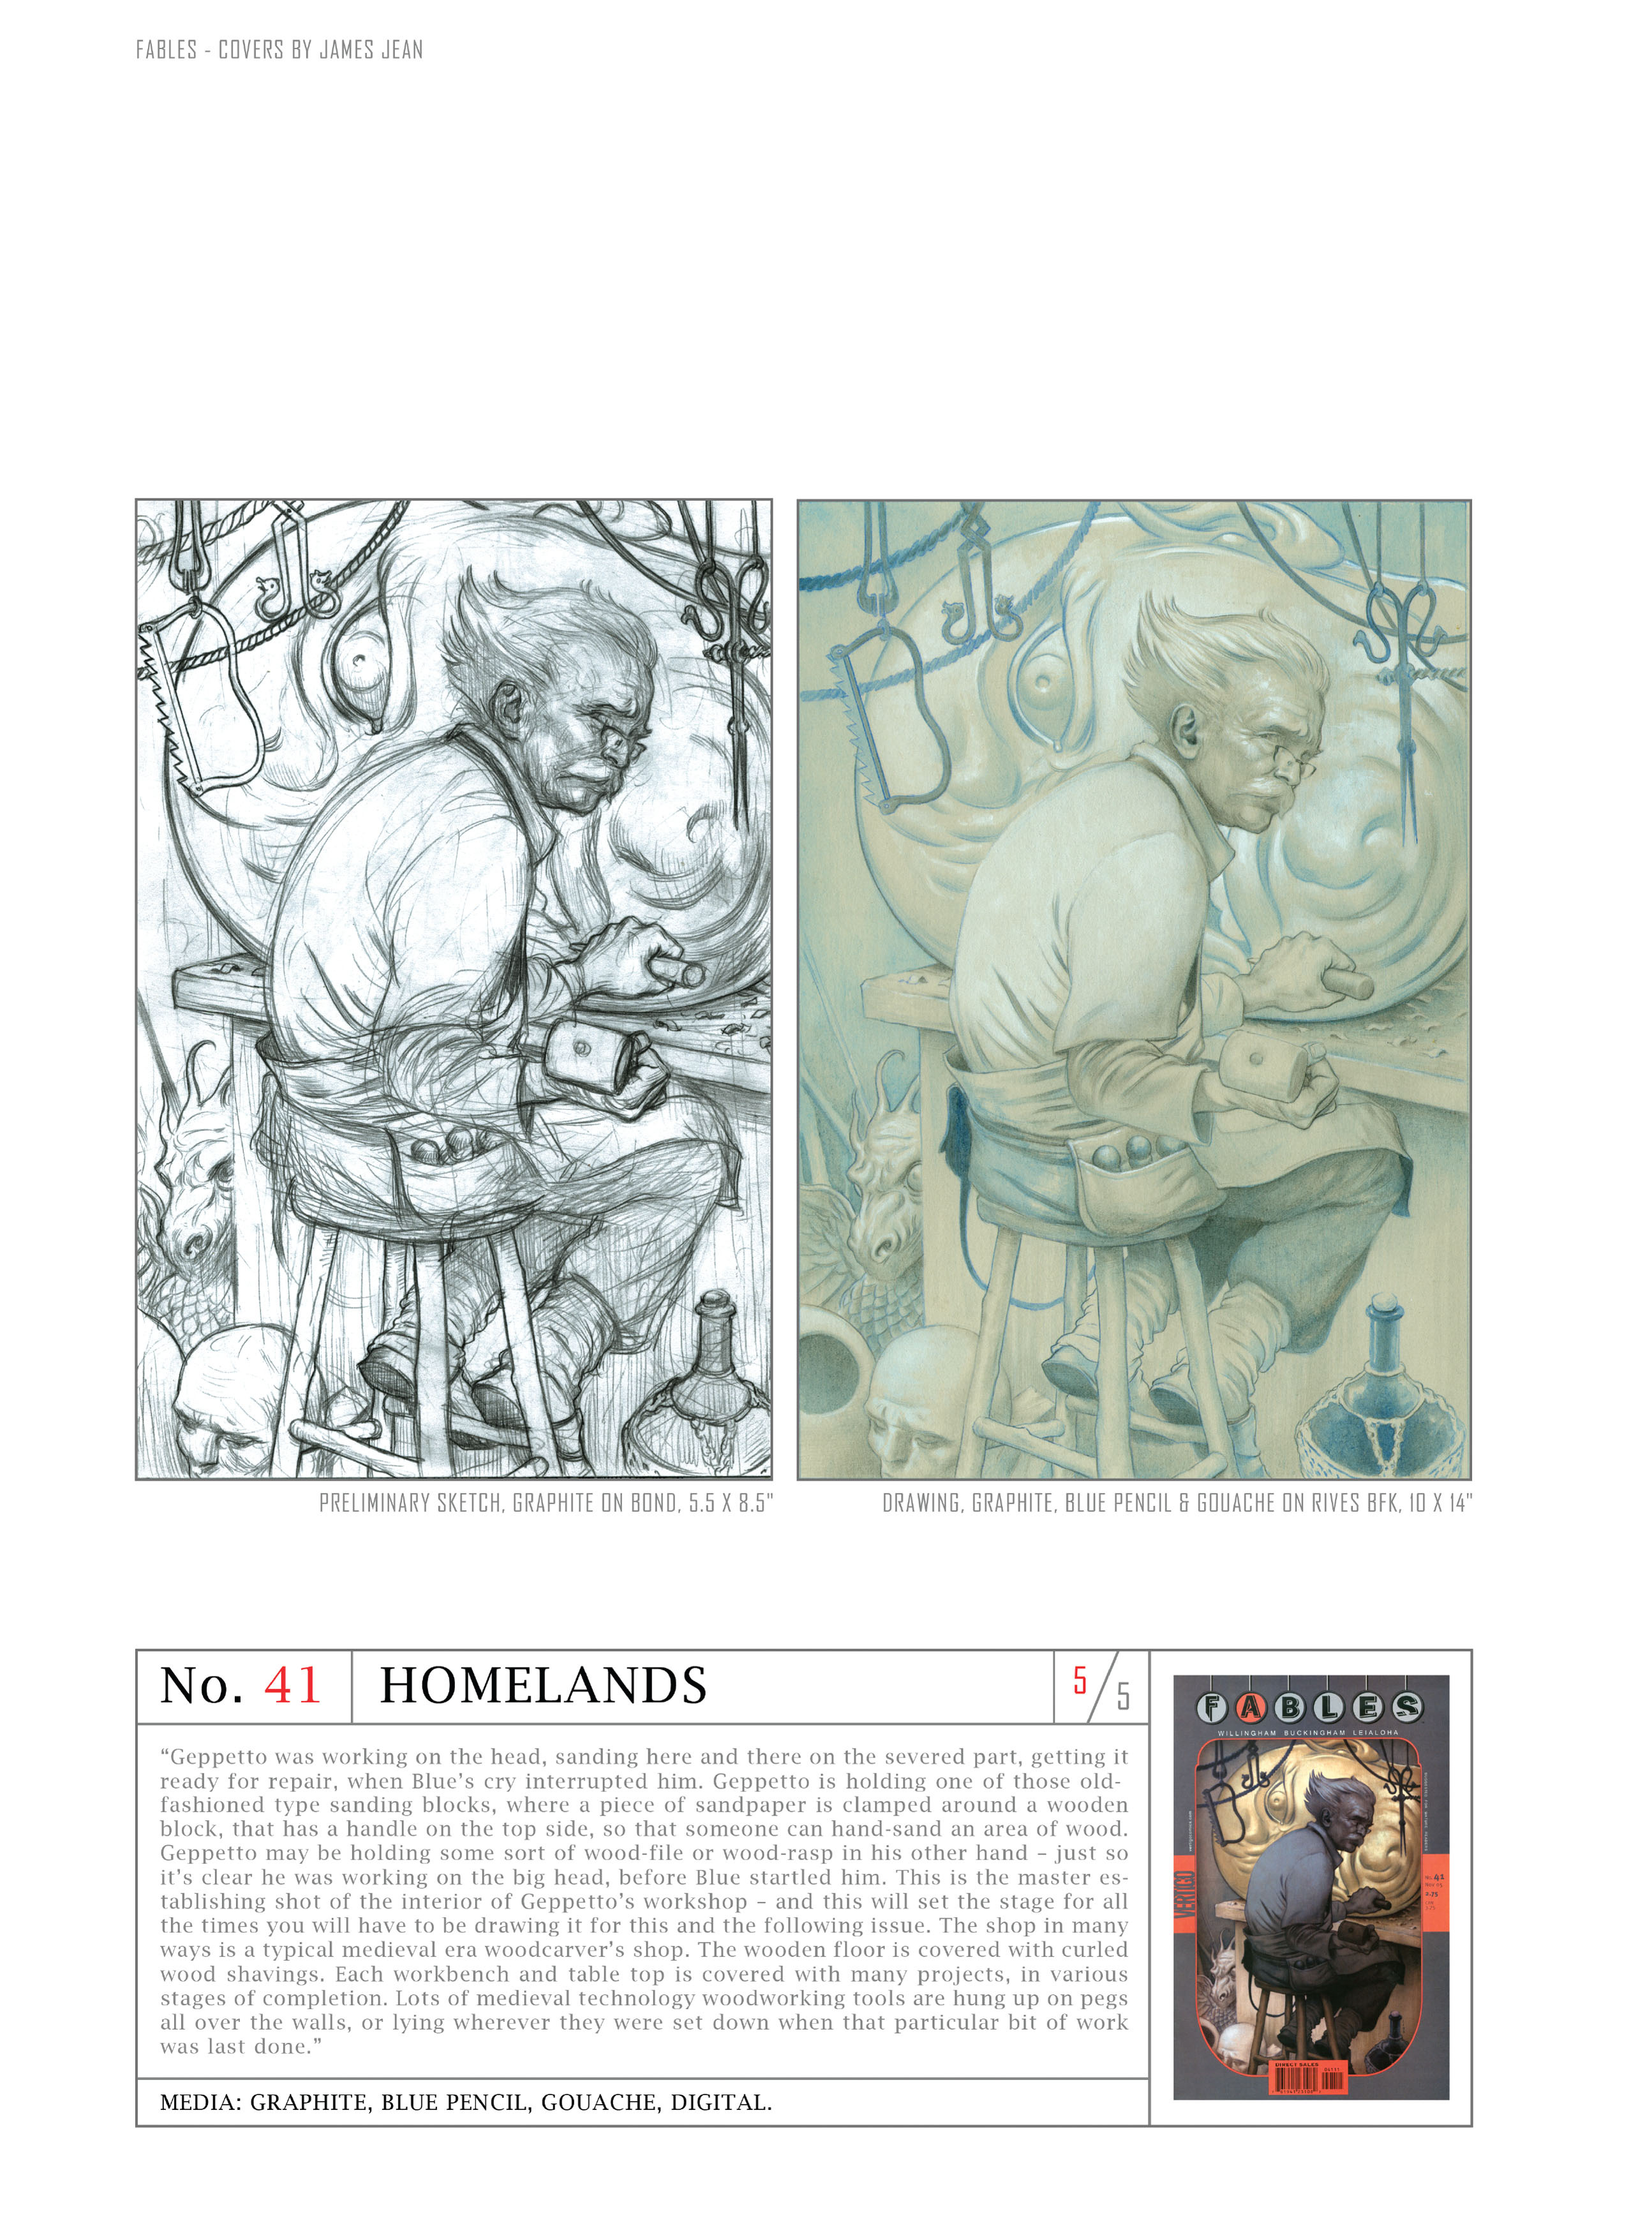 Read online Fables: Covers by James Jean comic -  Issue # TPB (Part 2) - 3